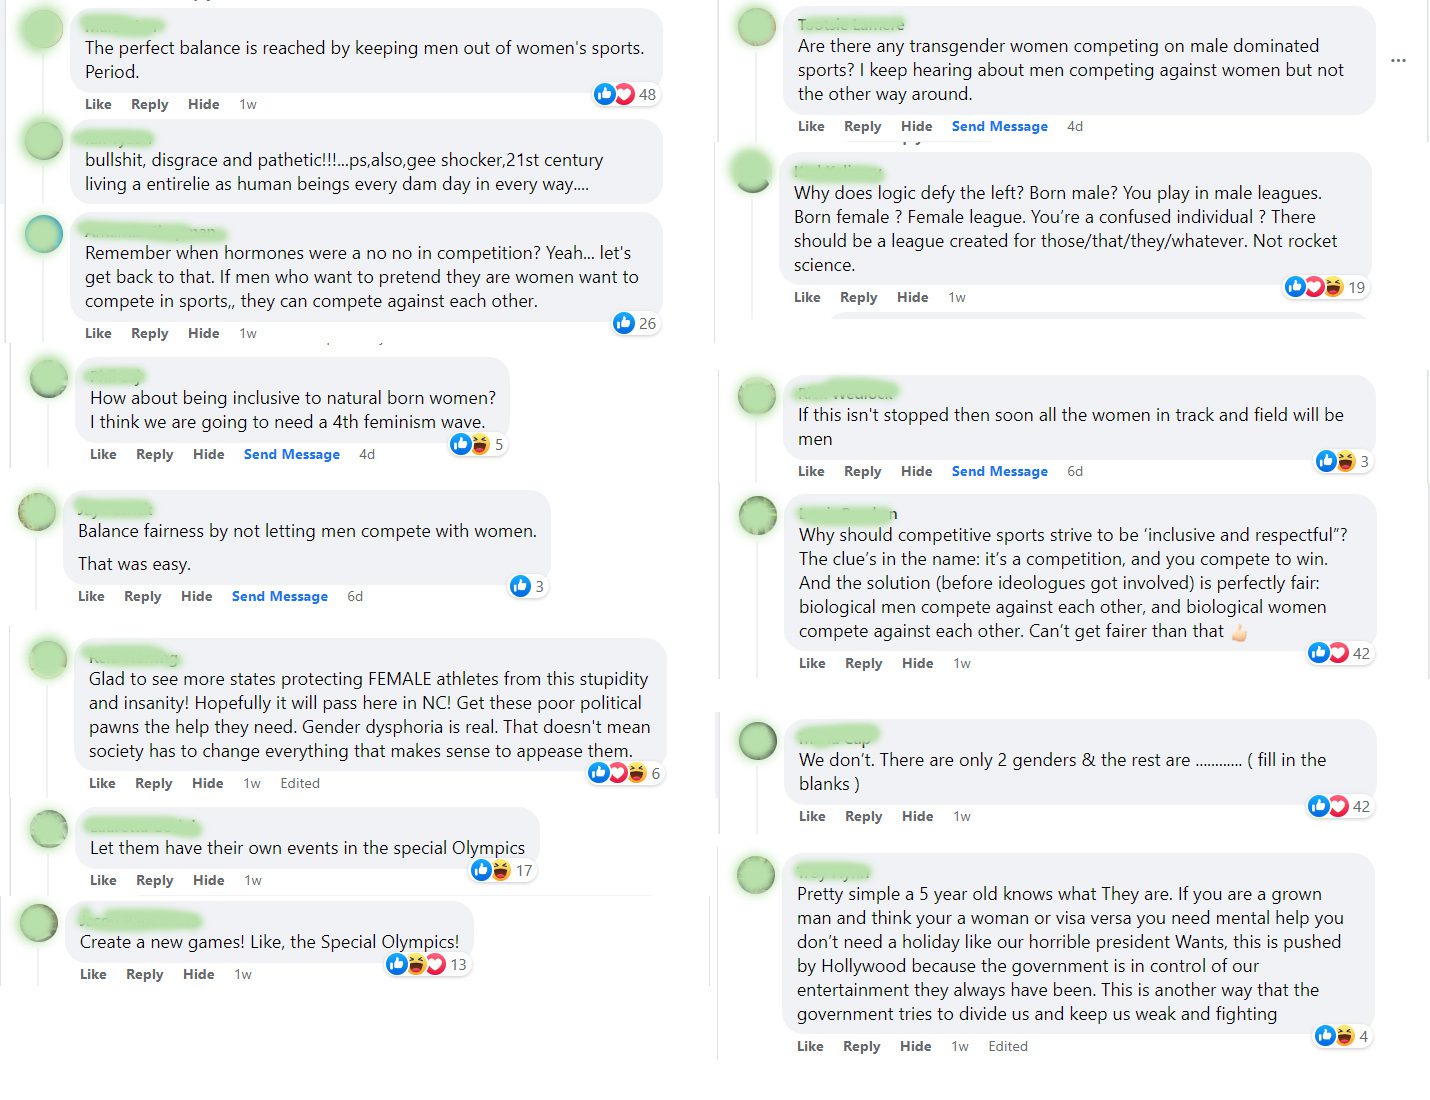 A collage of Facebook comments expressing transphobia and hostility towards transgender athletes in women’s sports